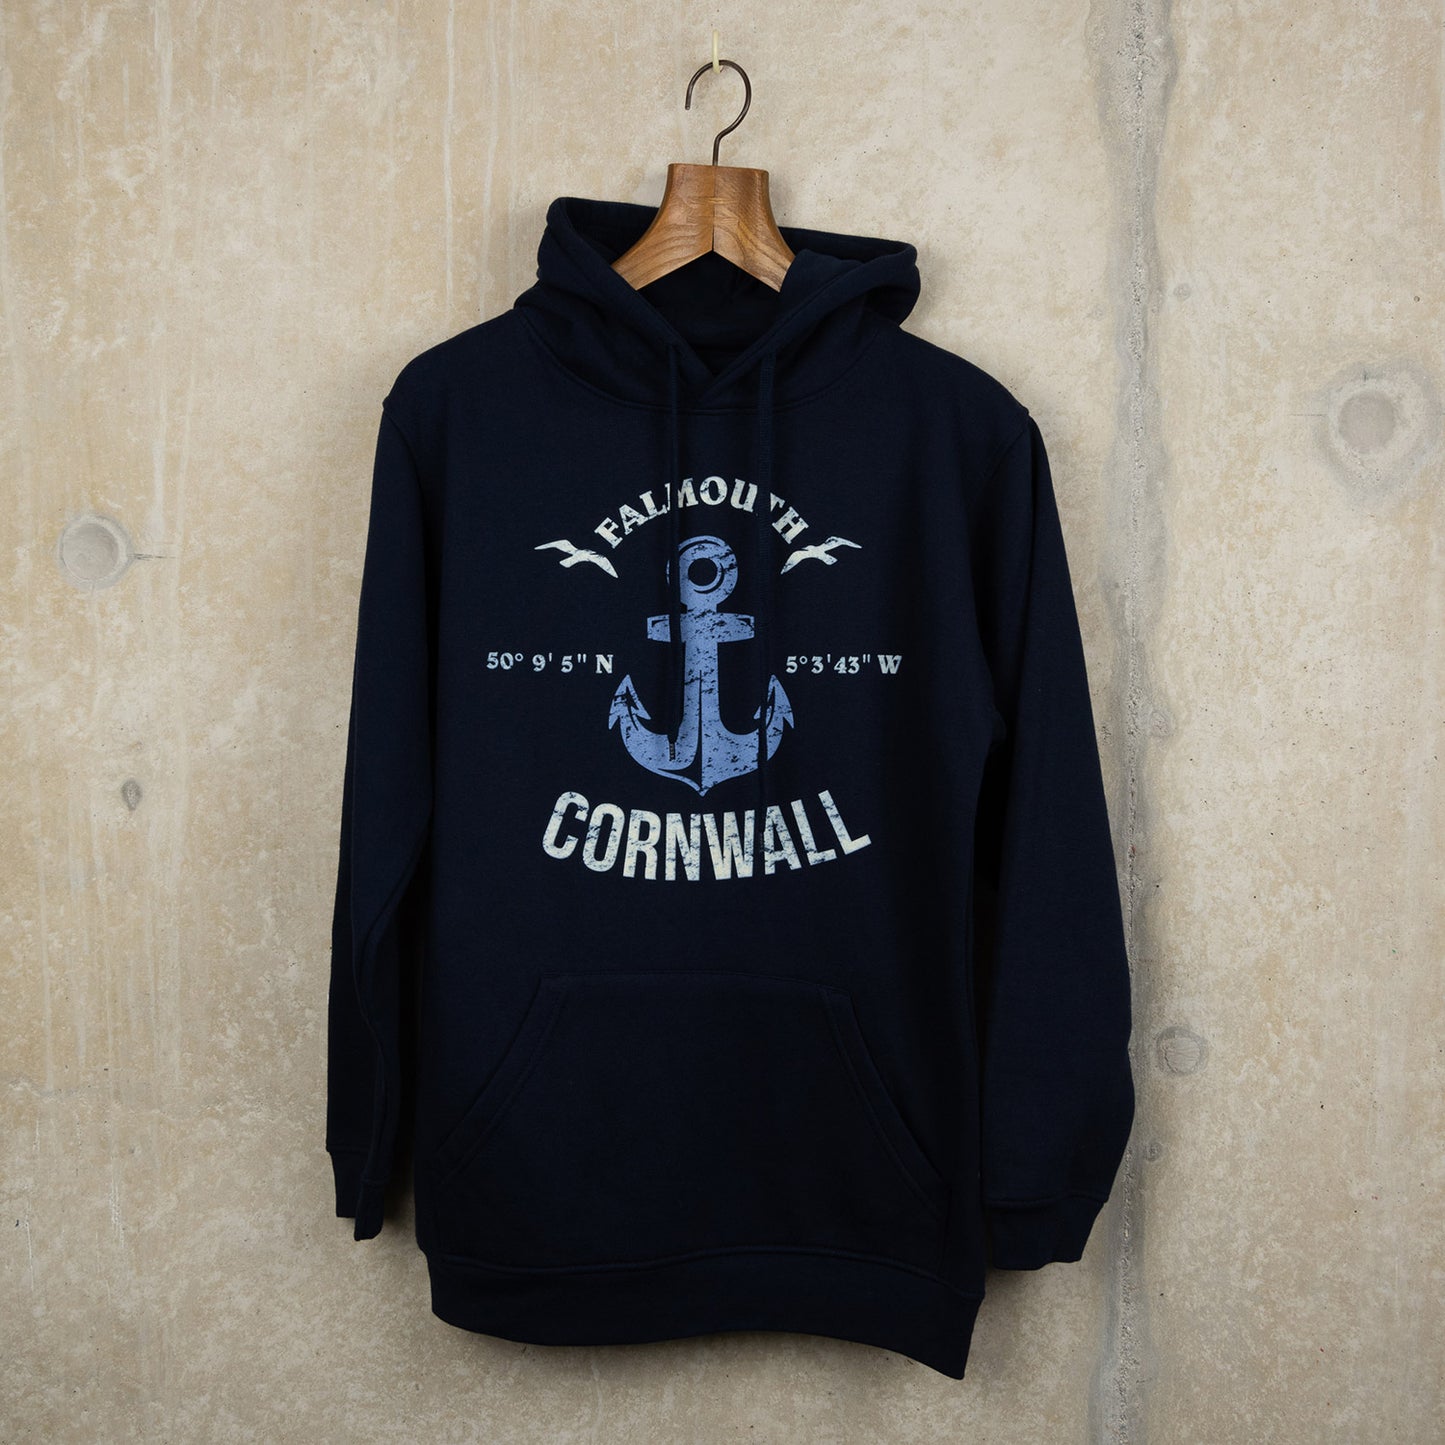 Navy hoodie with bespoke design made for the museum. Falmouth Cornwall in white writing around a distressed blue anchor